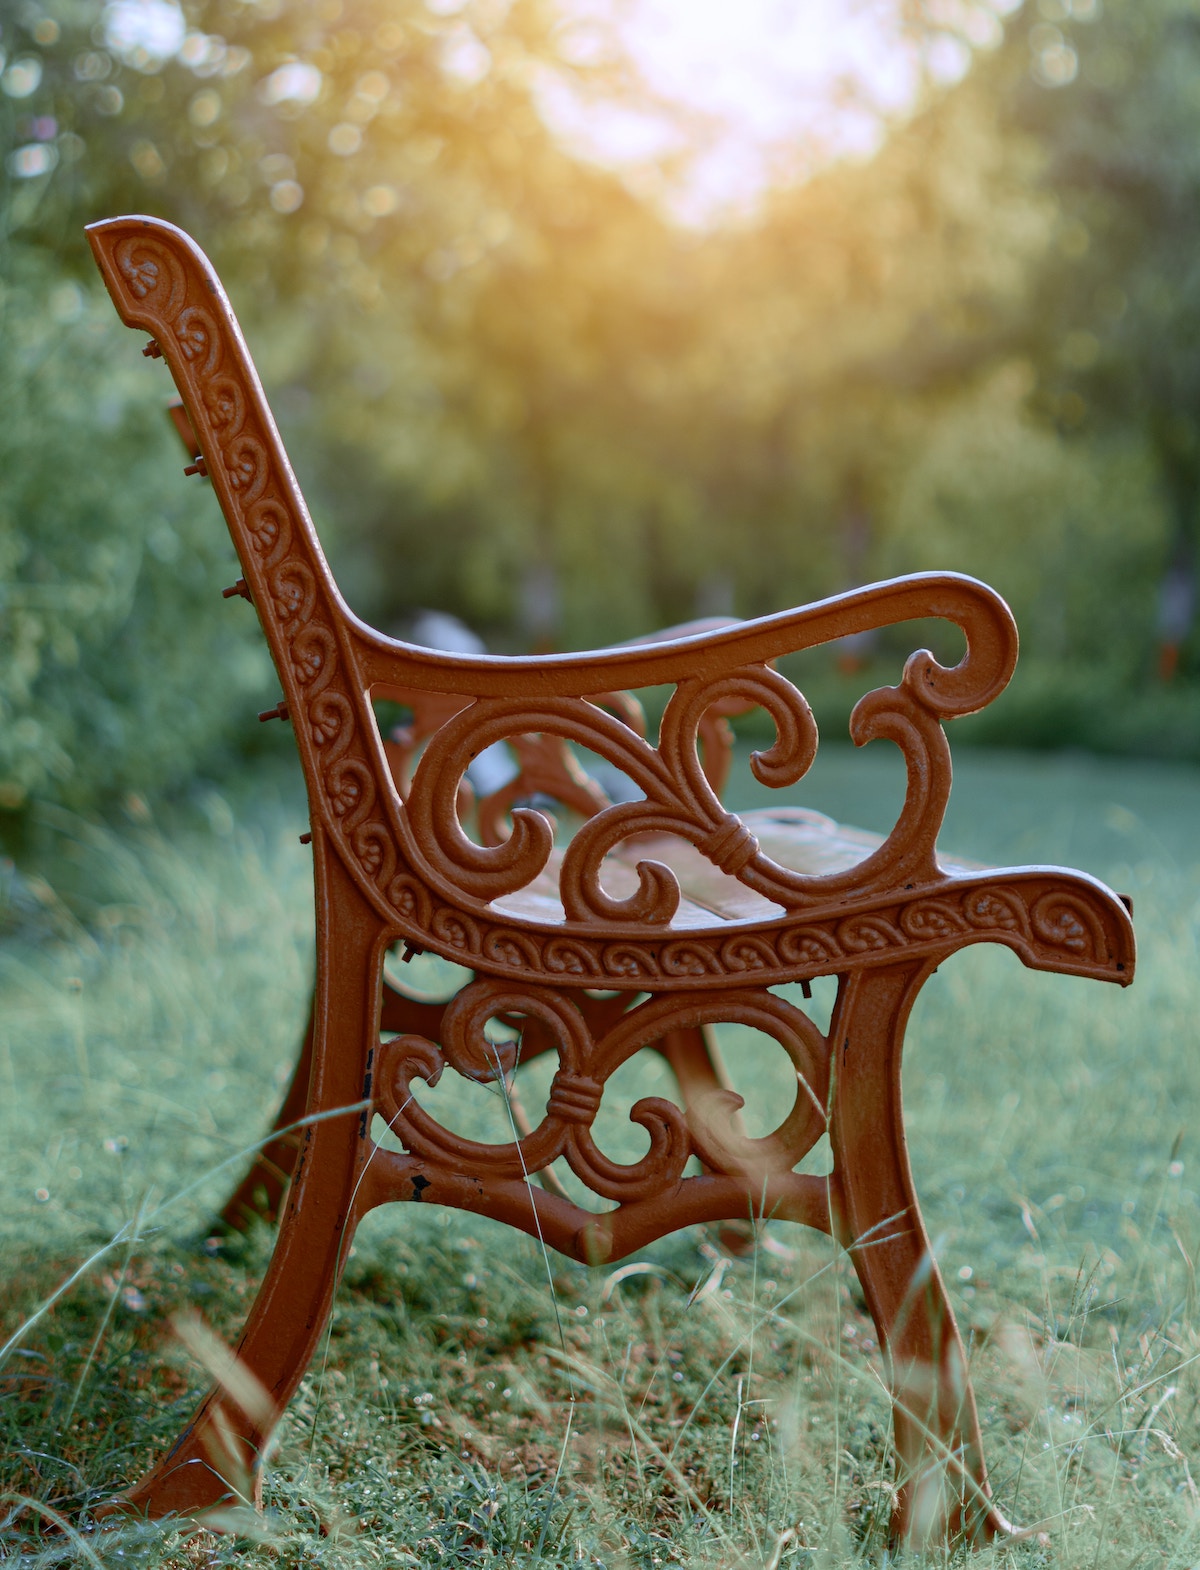 What is the history of outdoor benches?